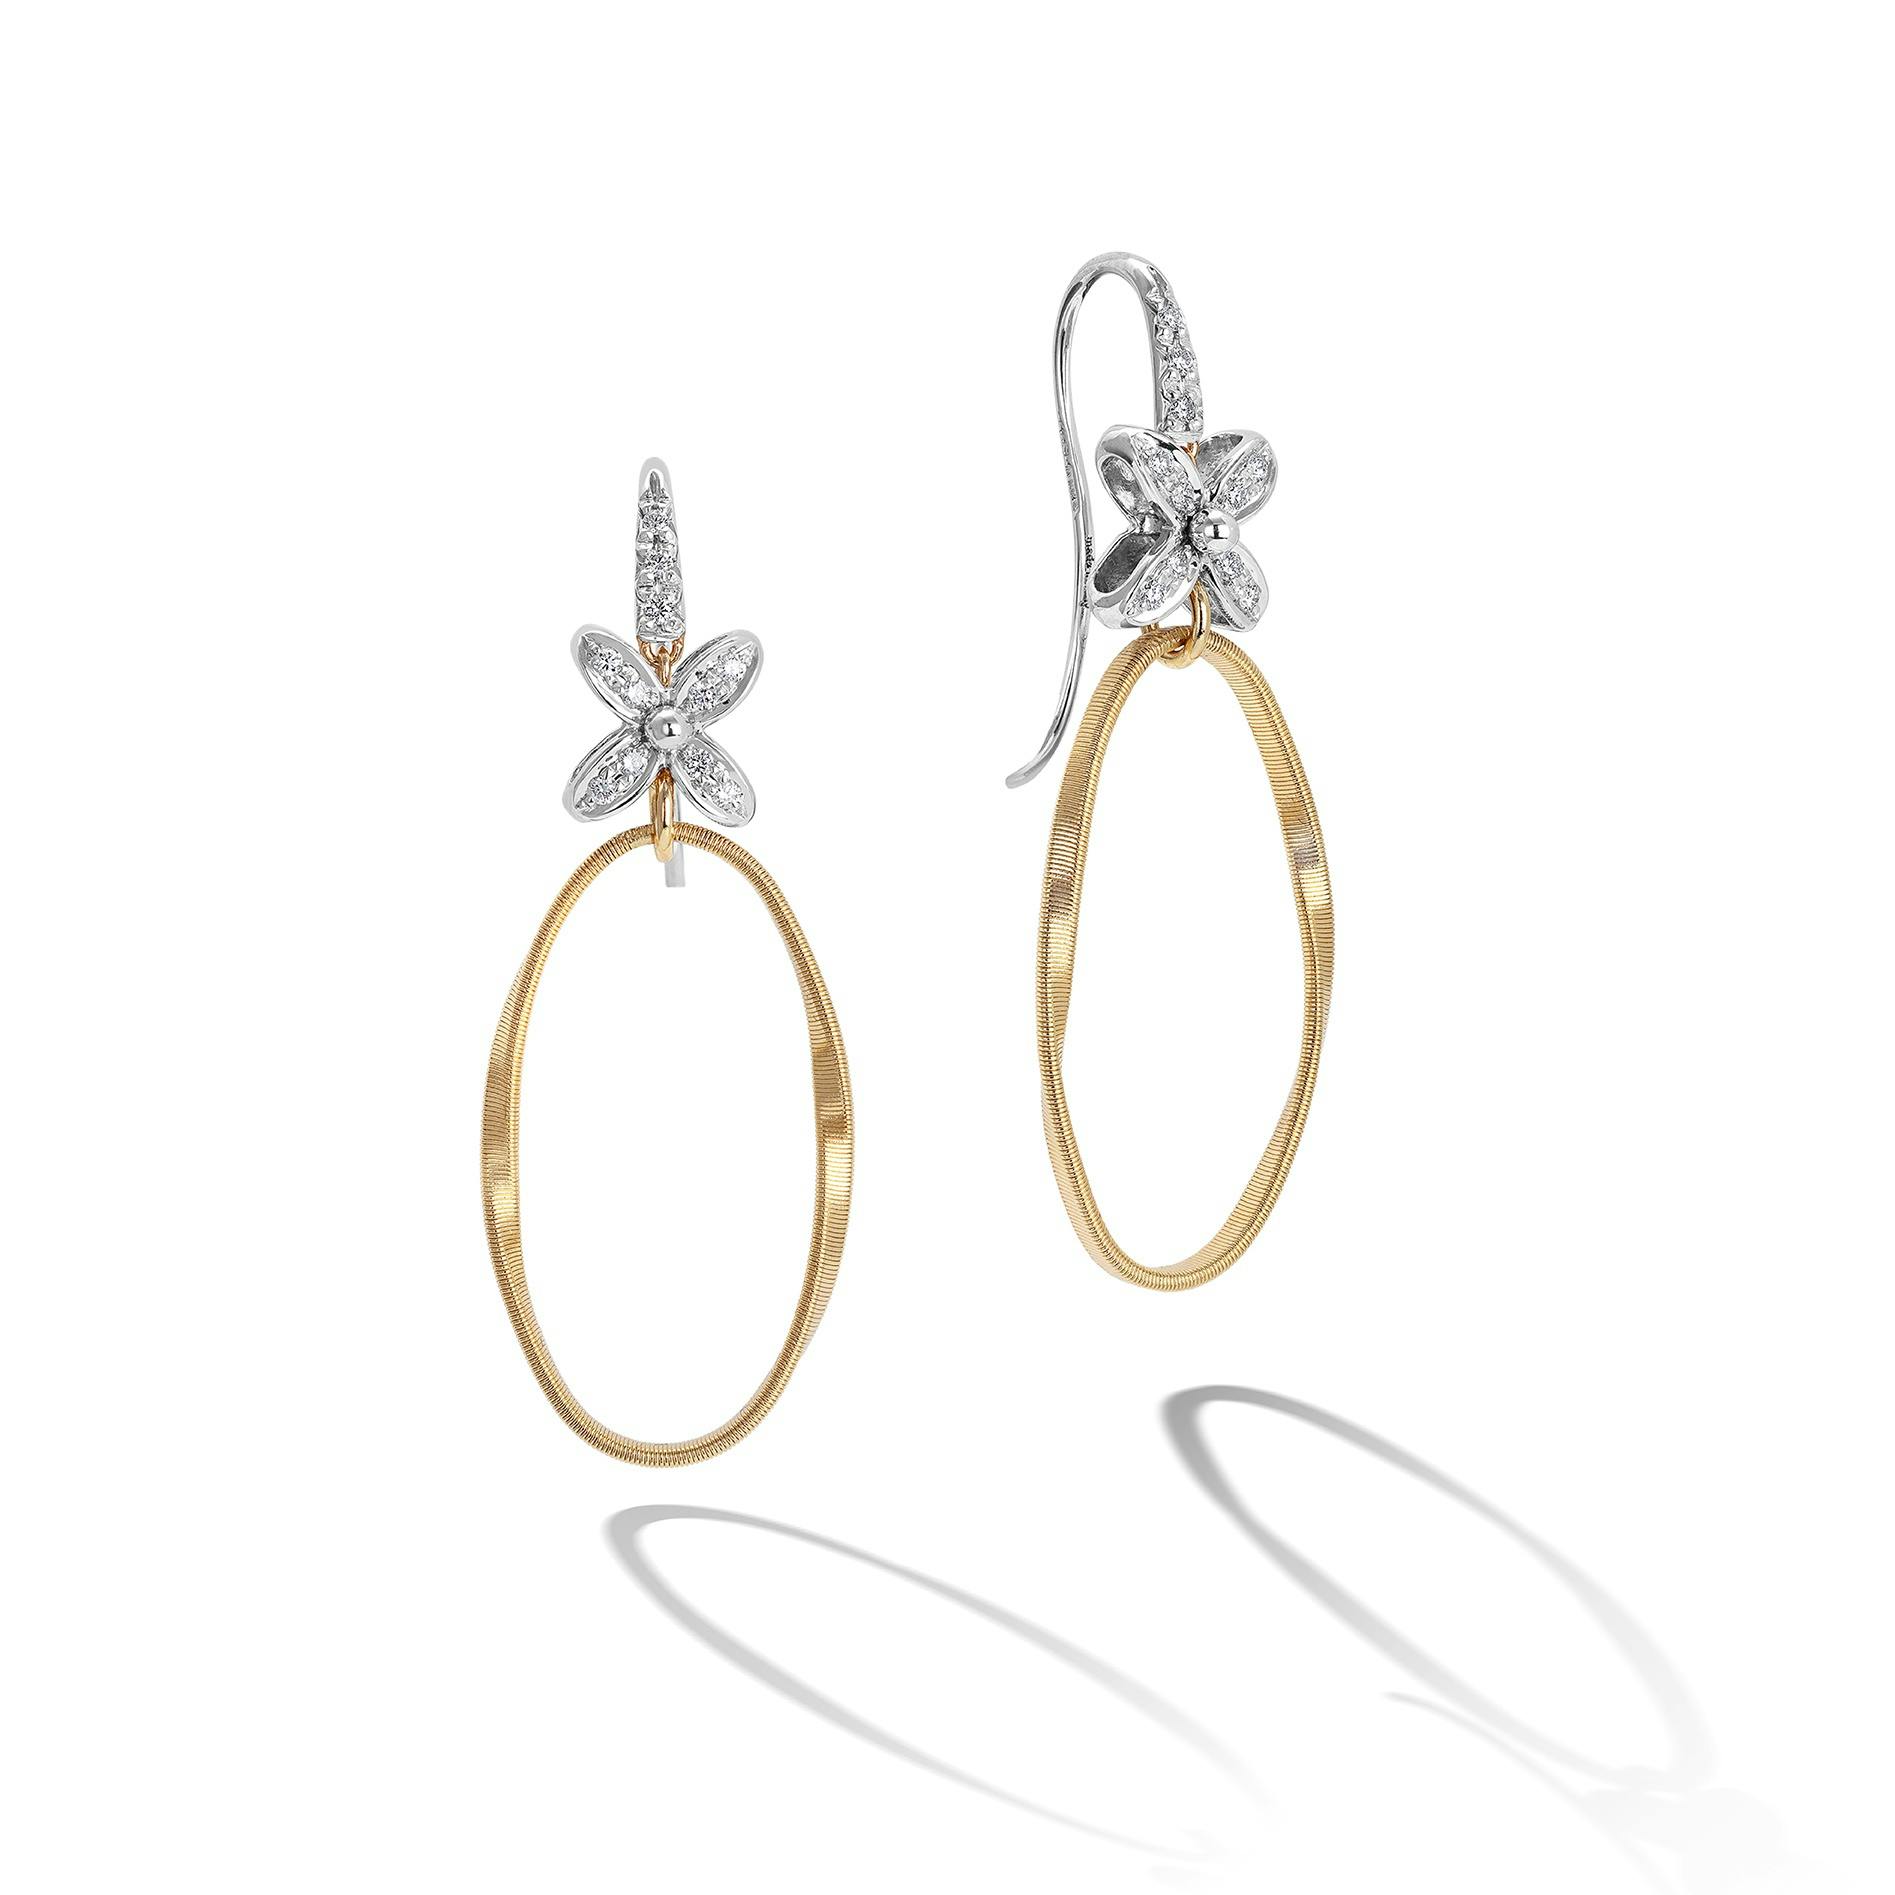 Marco Bicego Marrakech Onde Collection 18K Yellow and White Gold French Hook Earrings with Diamond Flowers 0